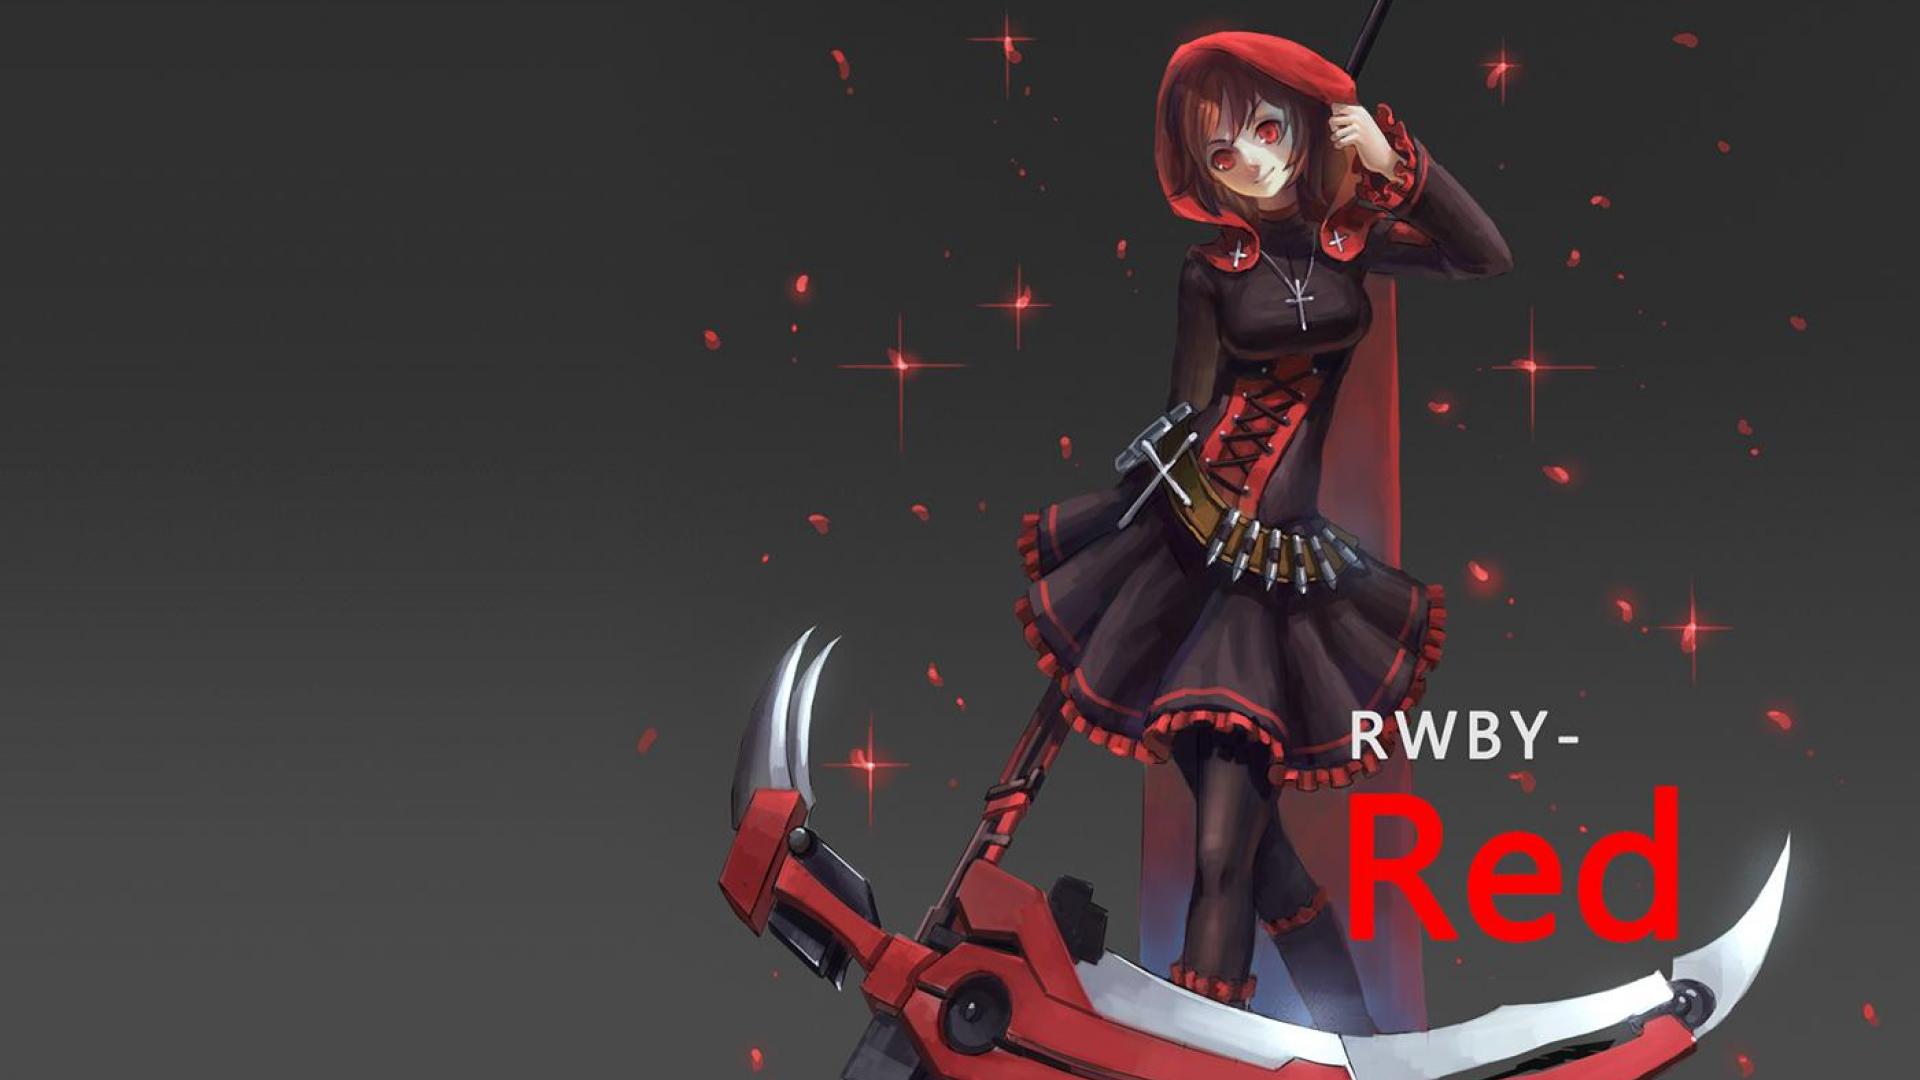 Rwby Red High Quality And Resolution Wallpaper On